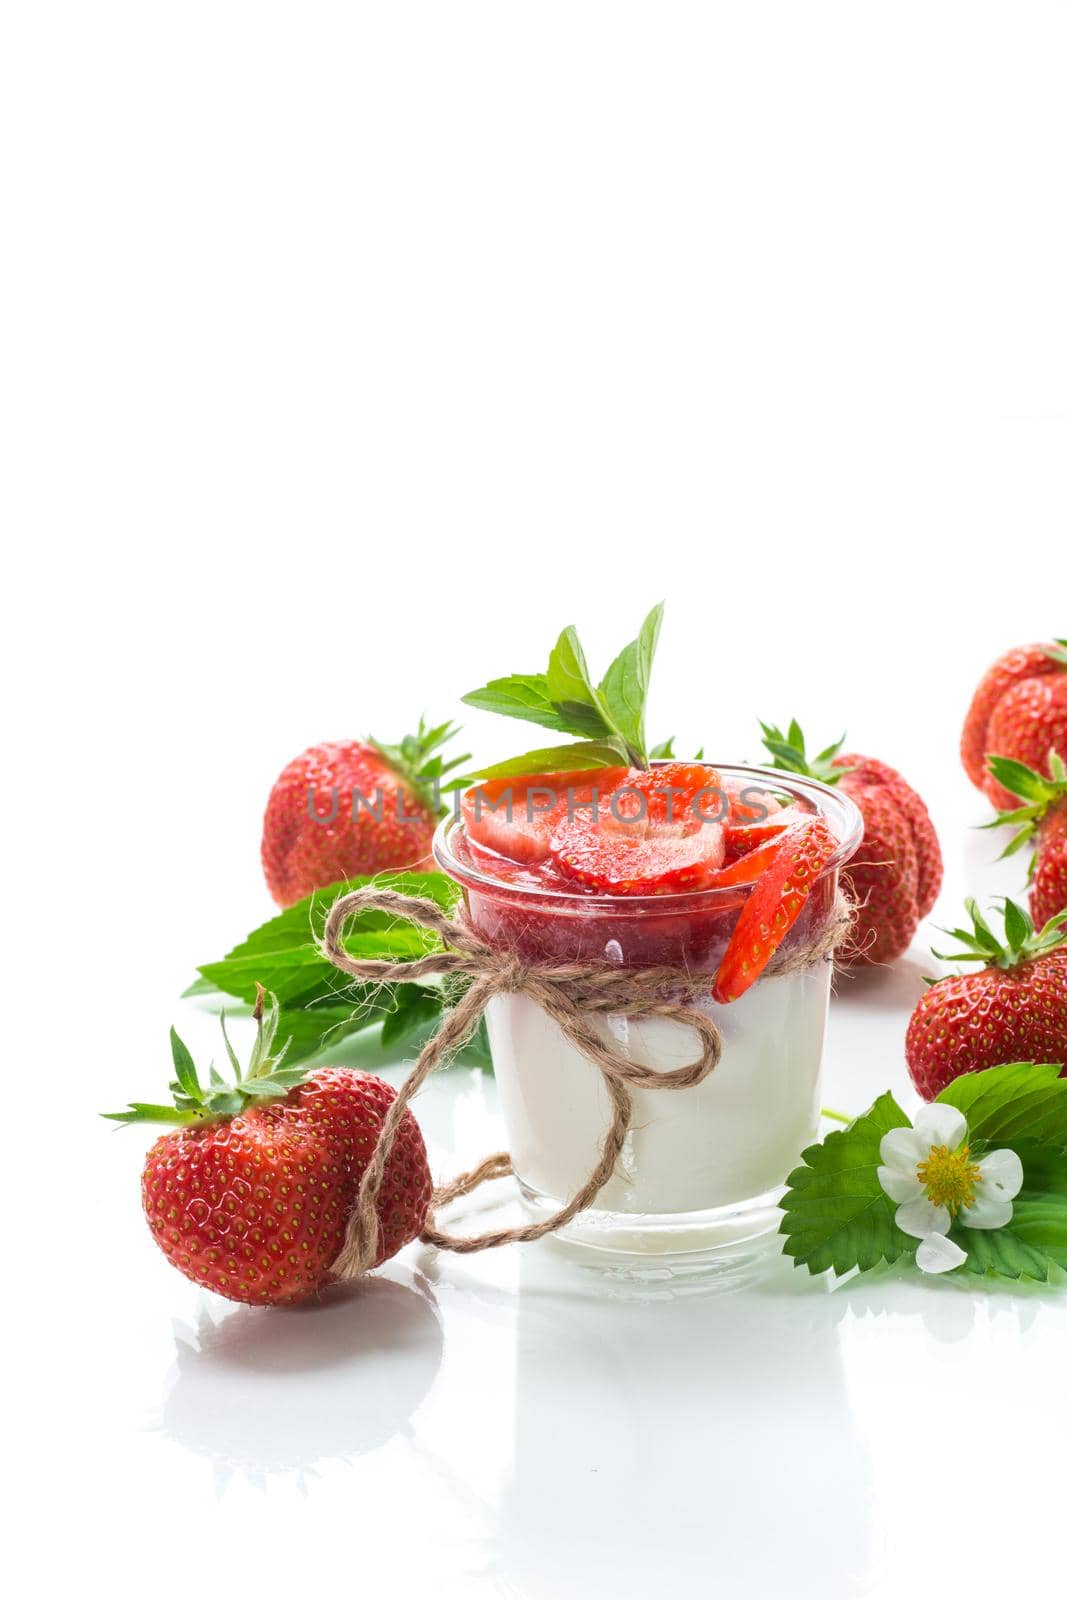 sweet homemade yogurt with strawberry jam and fresh strawberries in a glass, isolated on white background.